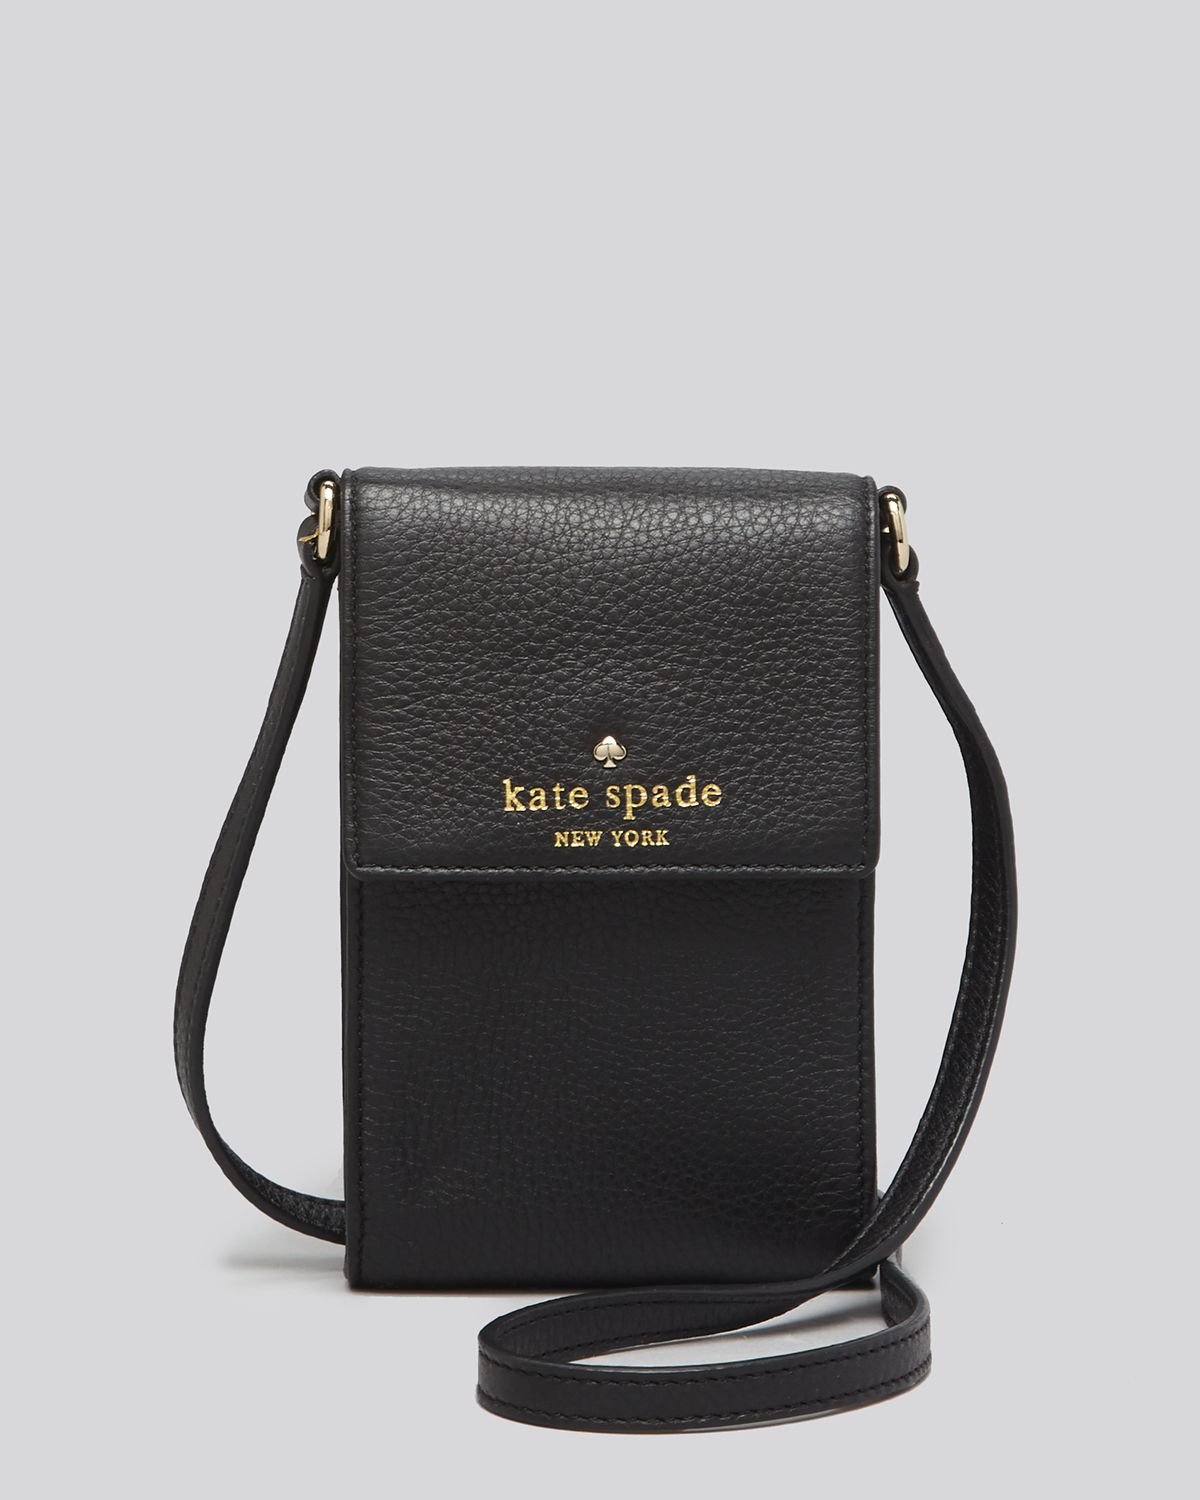 Kate spade new york Cobble Hill Brandice Crossbody Iphone 5 and 5s in Black | Lyst